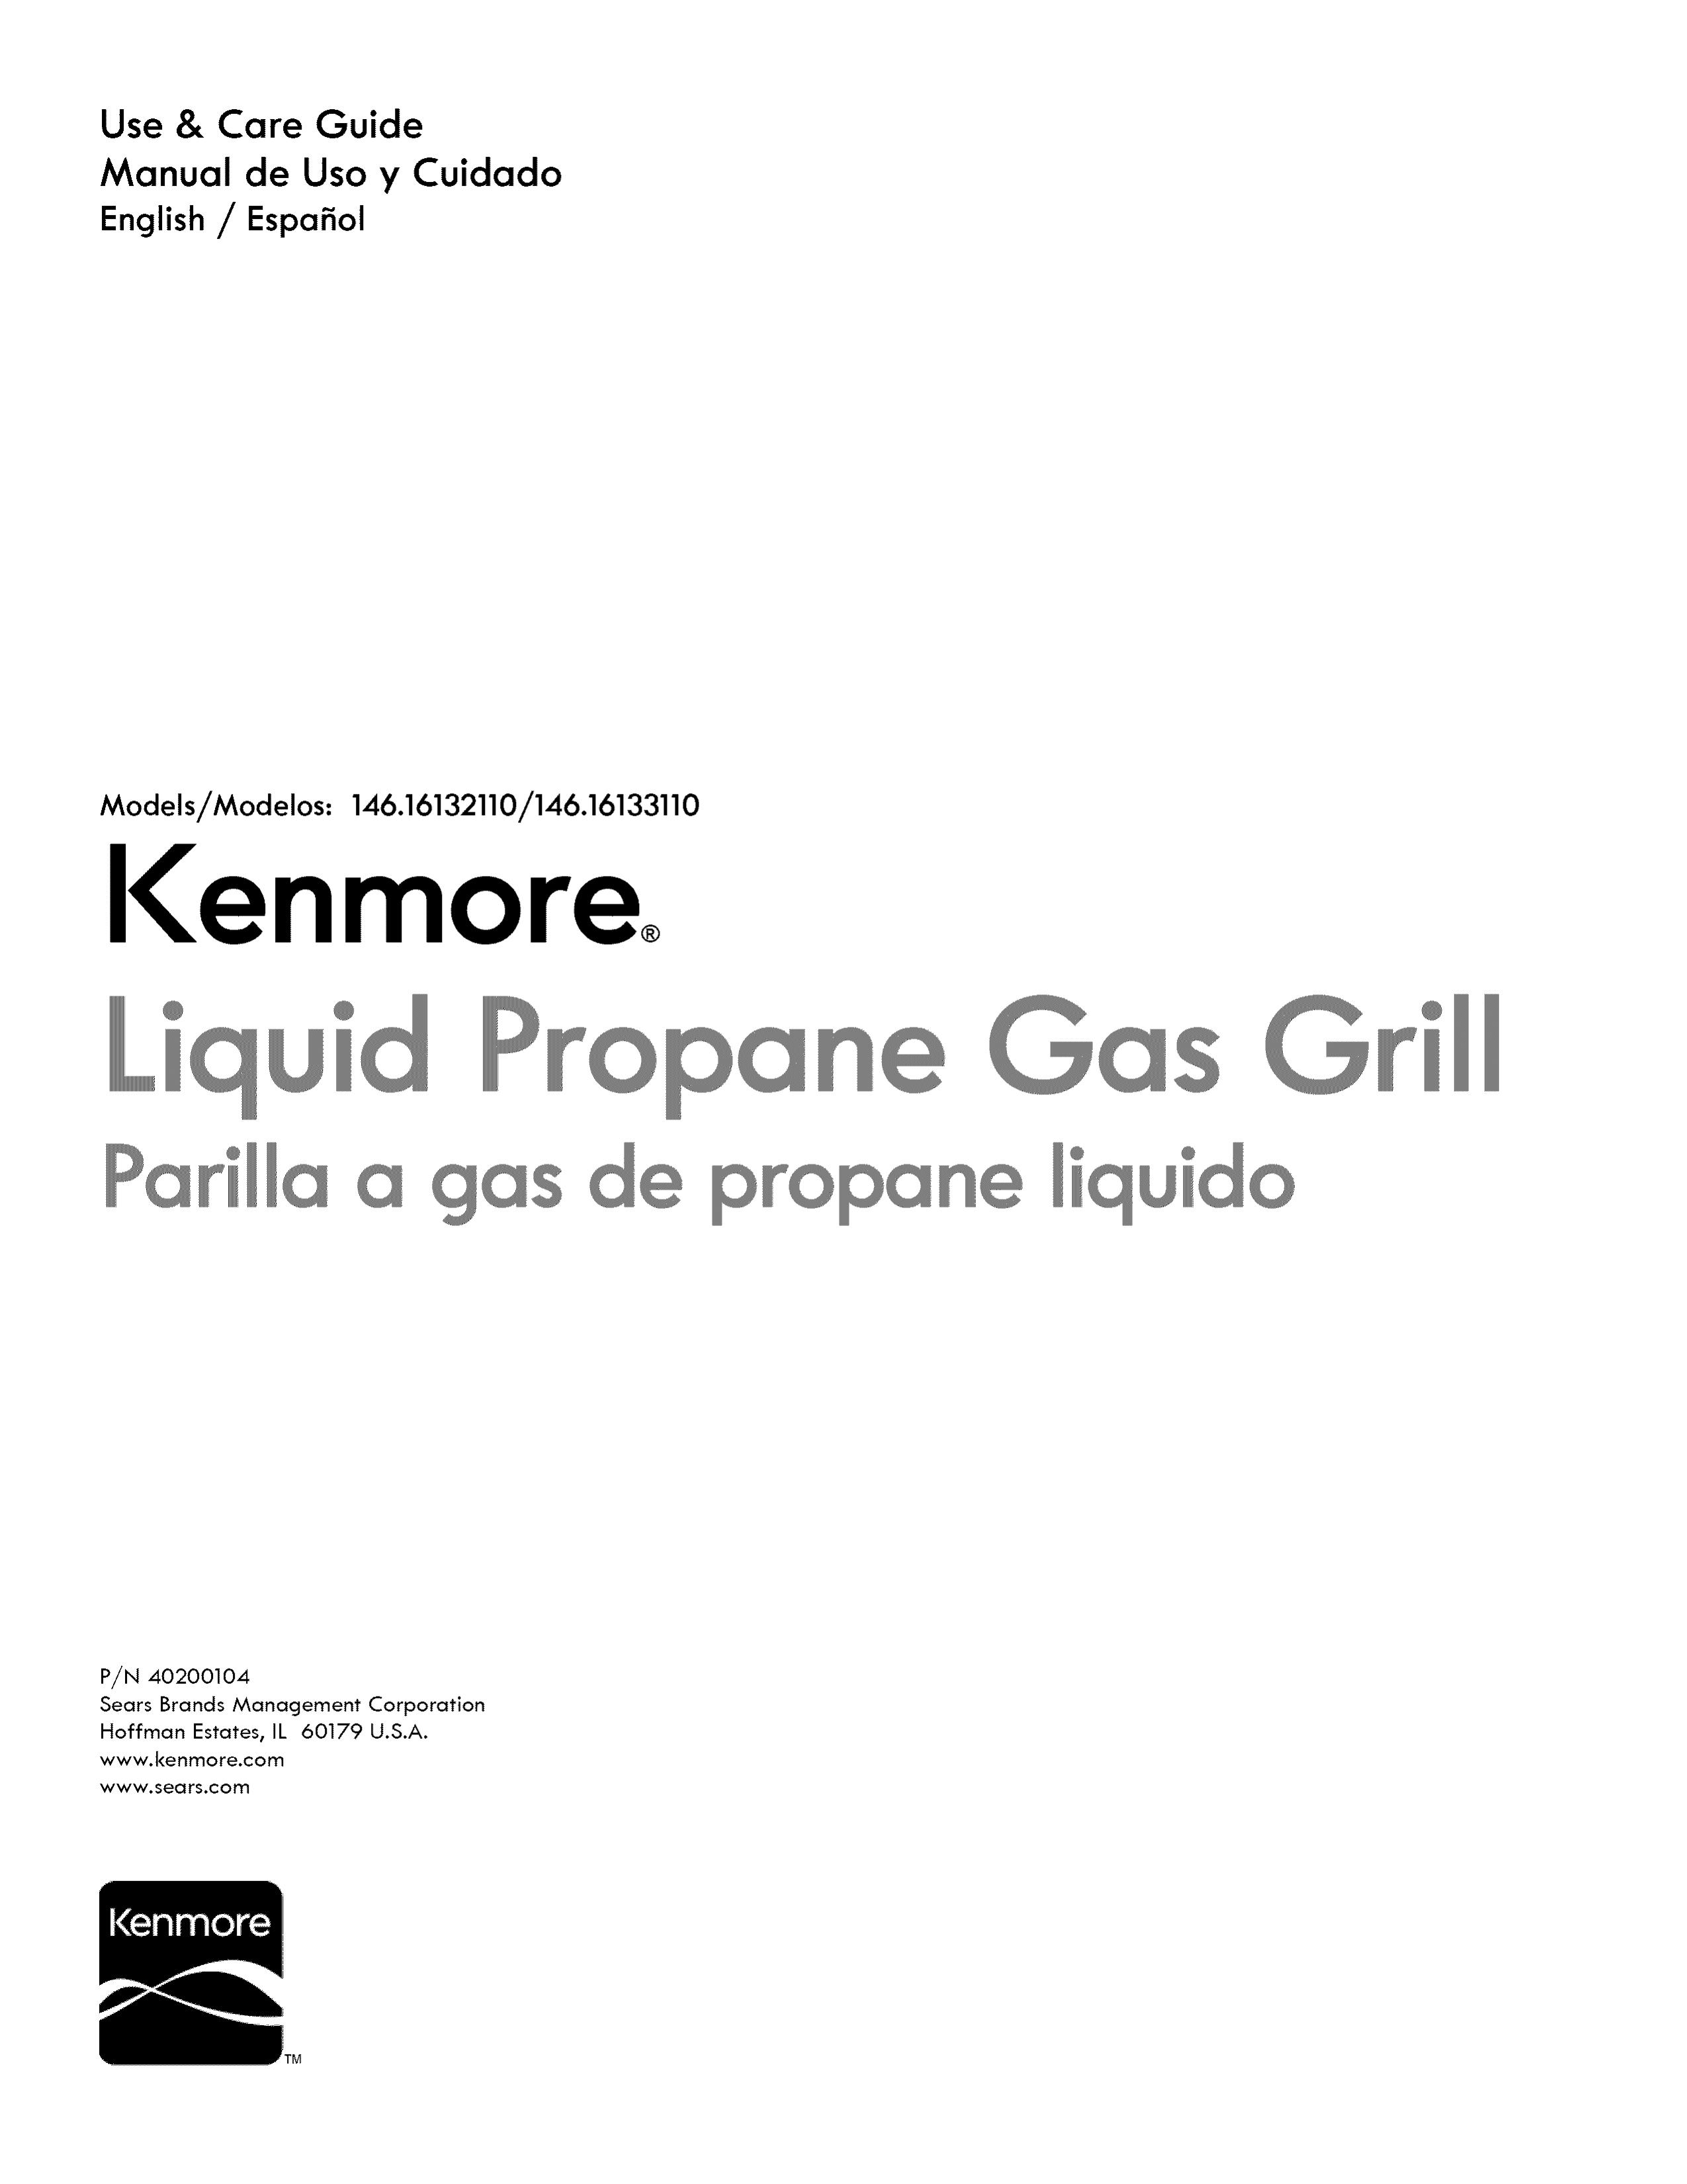 Kenmore 146.1613211 Gas Grill User Manual (Page 1)